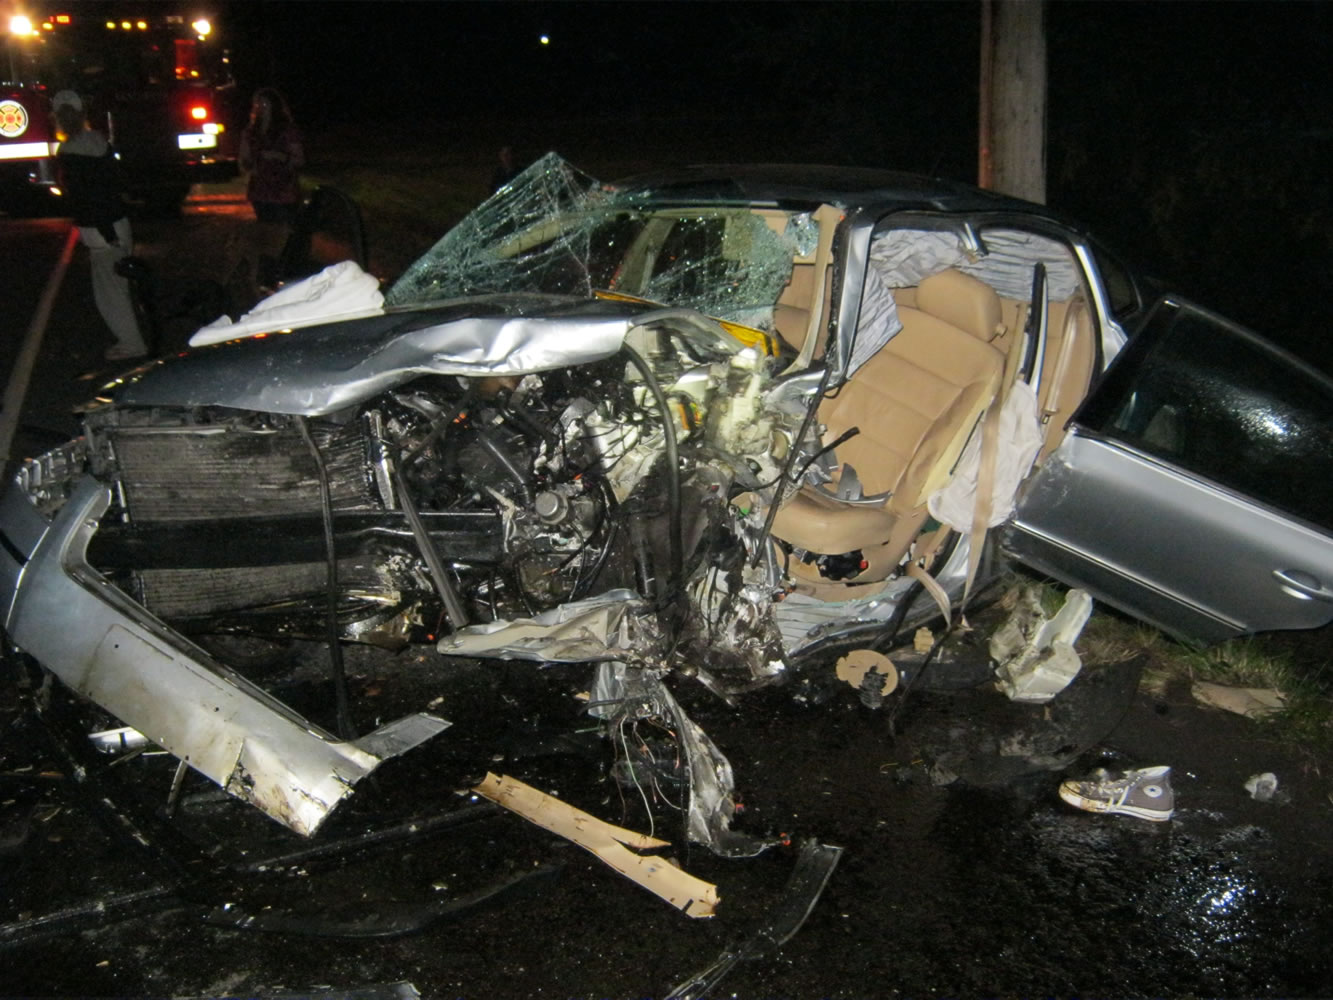 Four people were taken to a hospital in a Tuesday night collision at Northeast 72nd Avenue and 126th Street, in the eastern Salmon Creek area north of Vancouver.